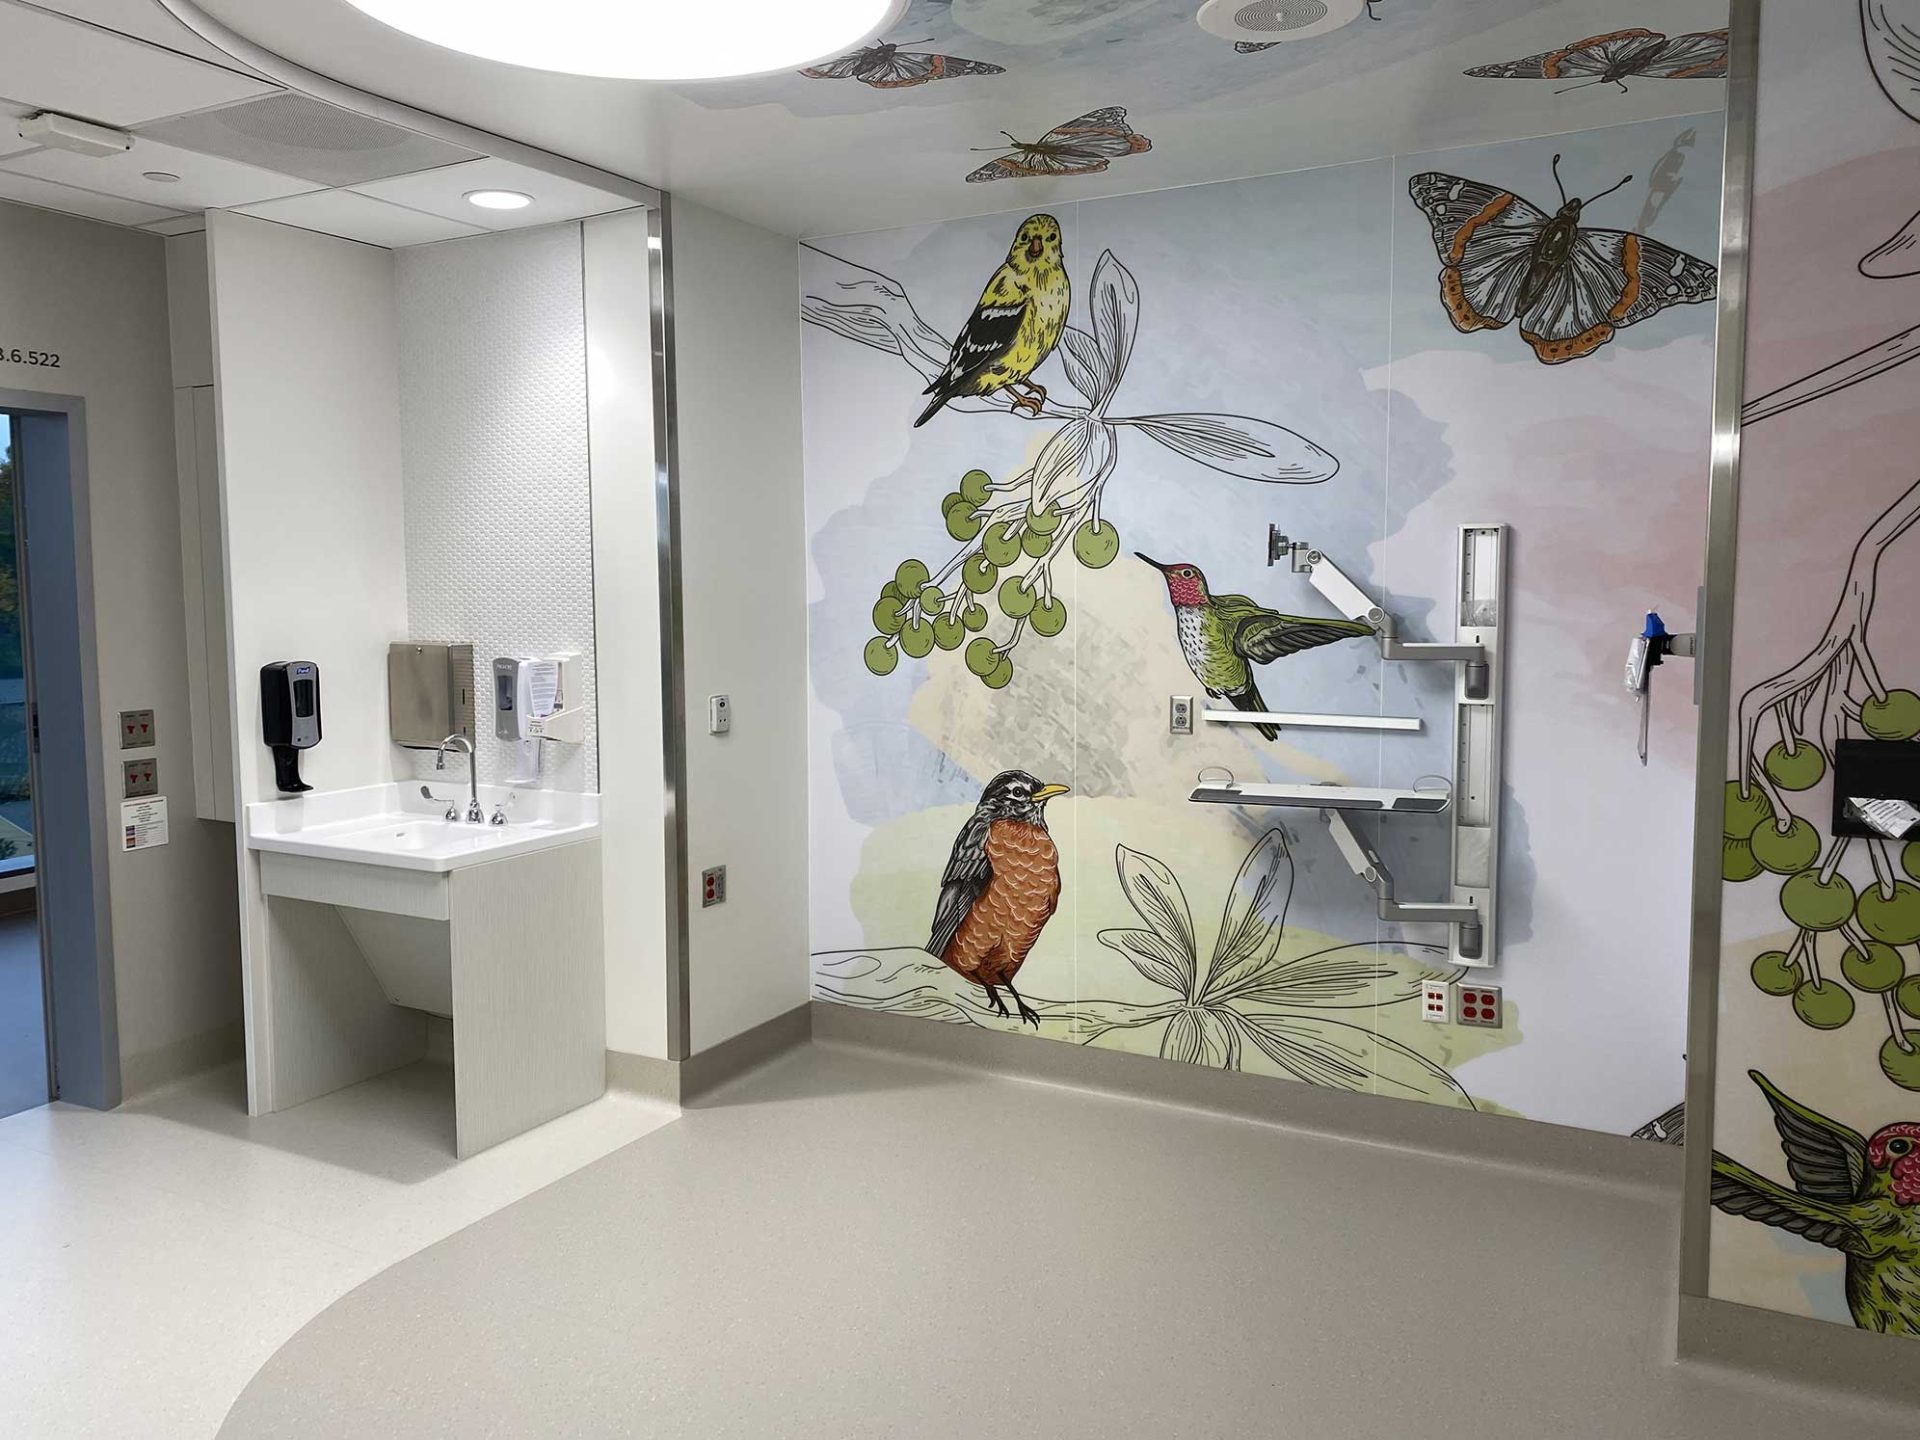 Mural on wall of patient room at Seattle Children's Hospital featuring birds and butterflies native to Seattle